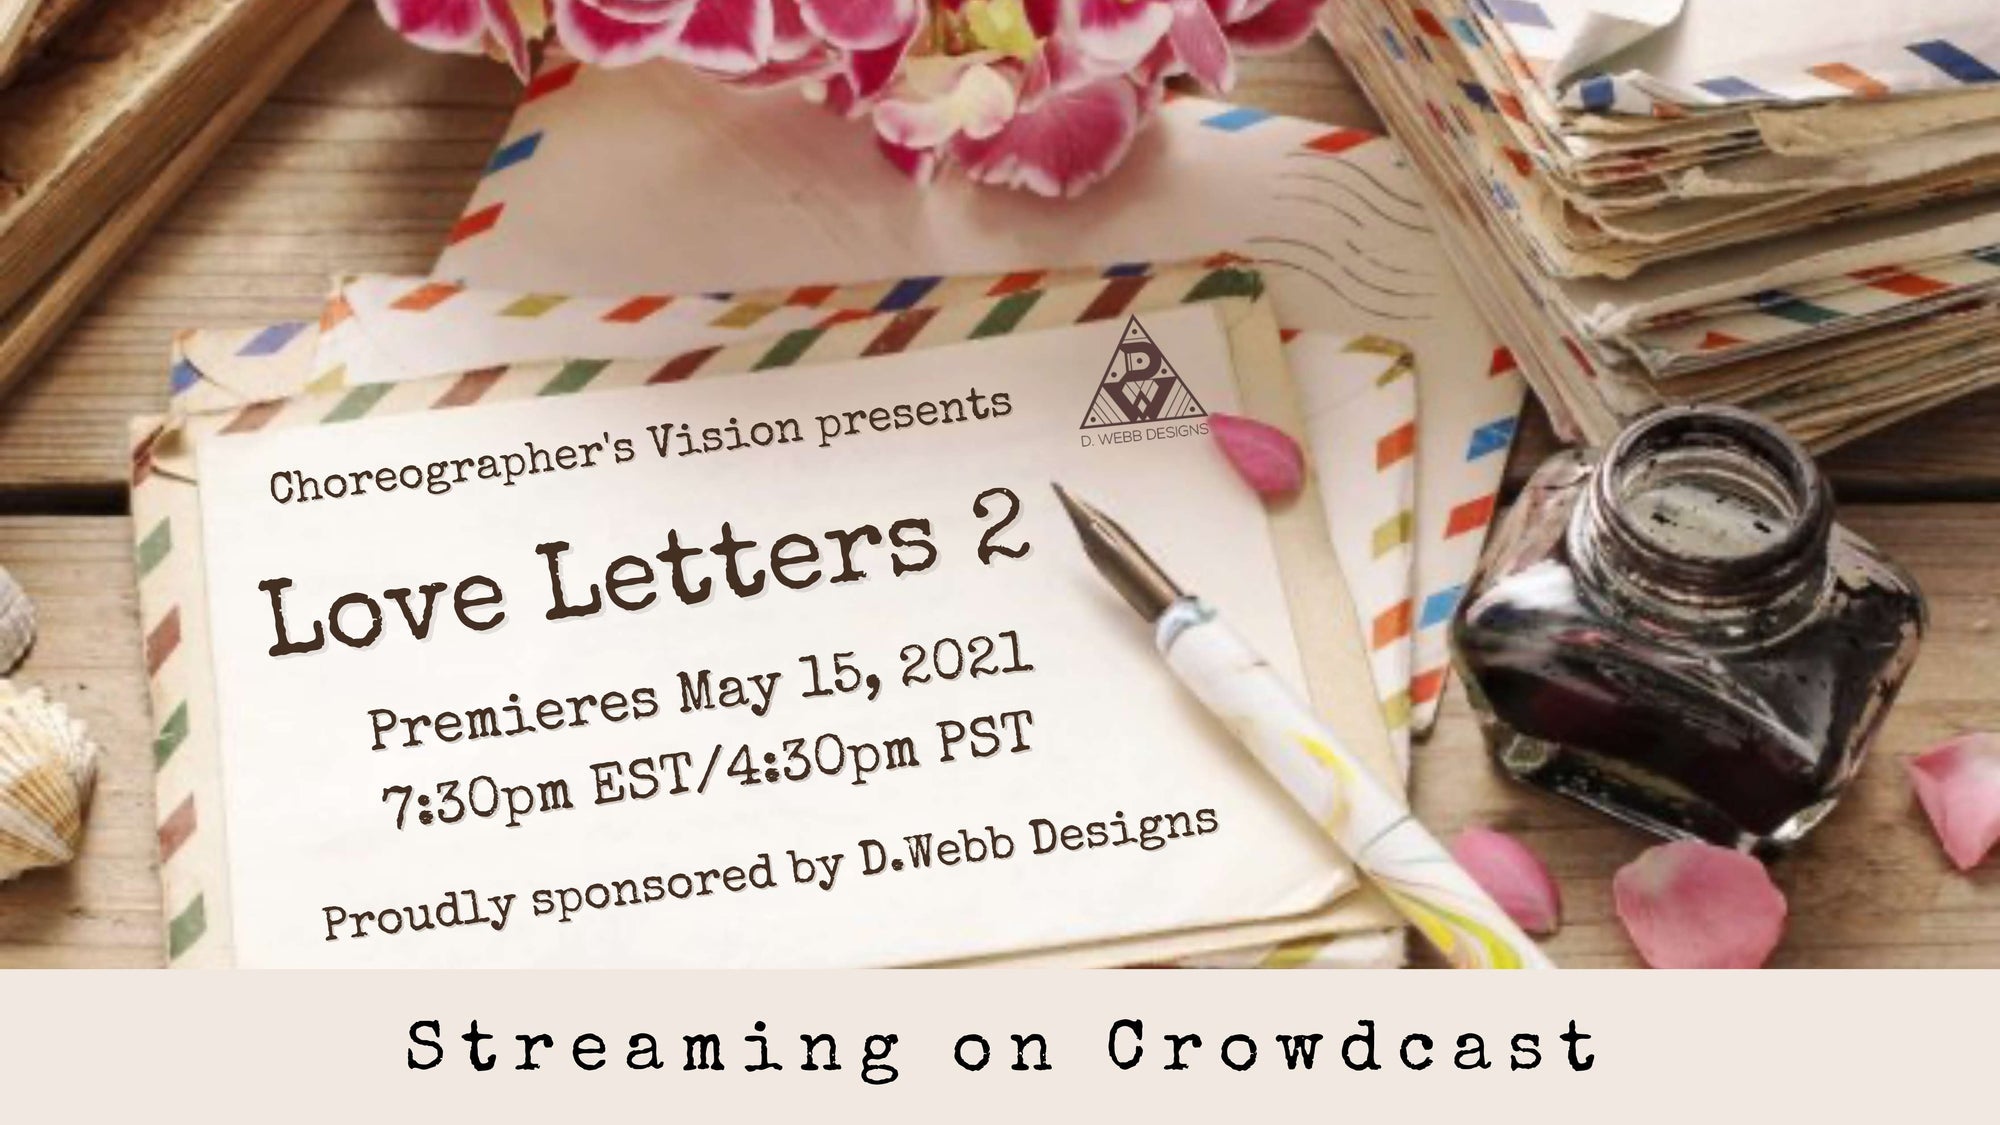 Love letters 2 flier May 15th on crowdcast